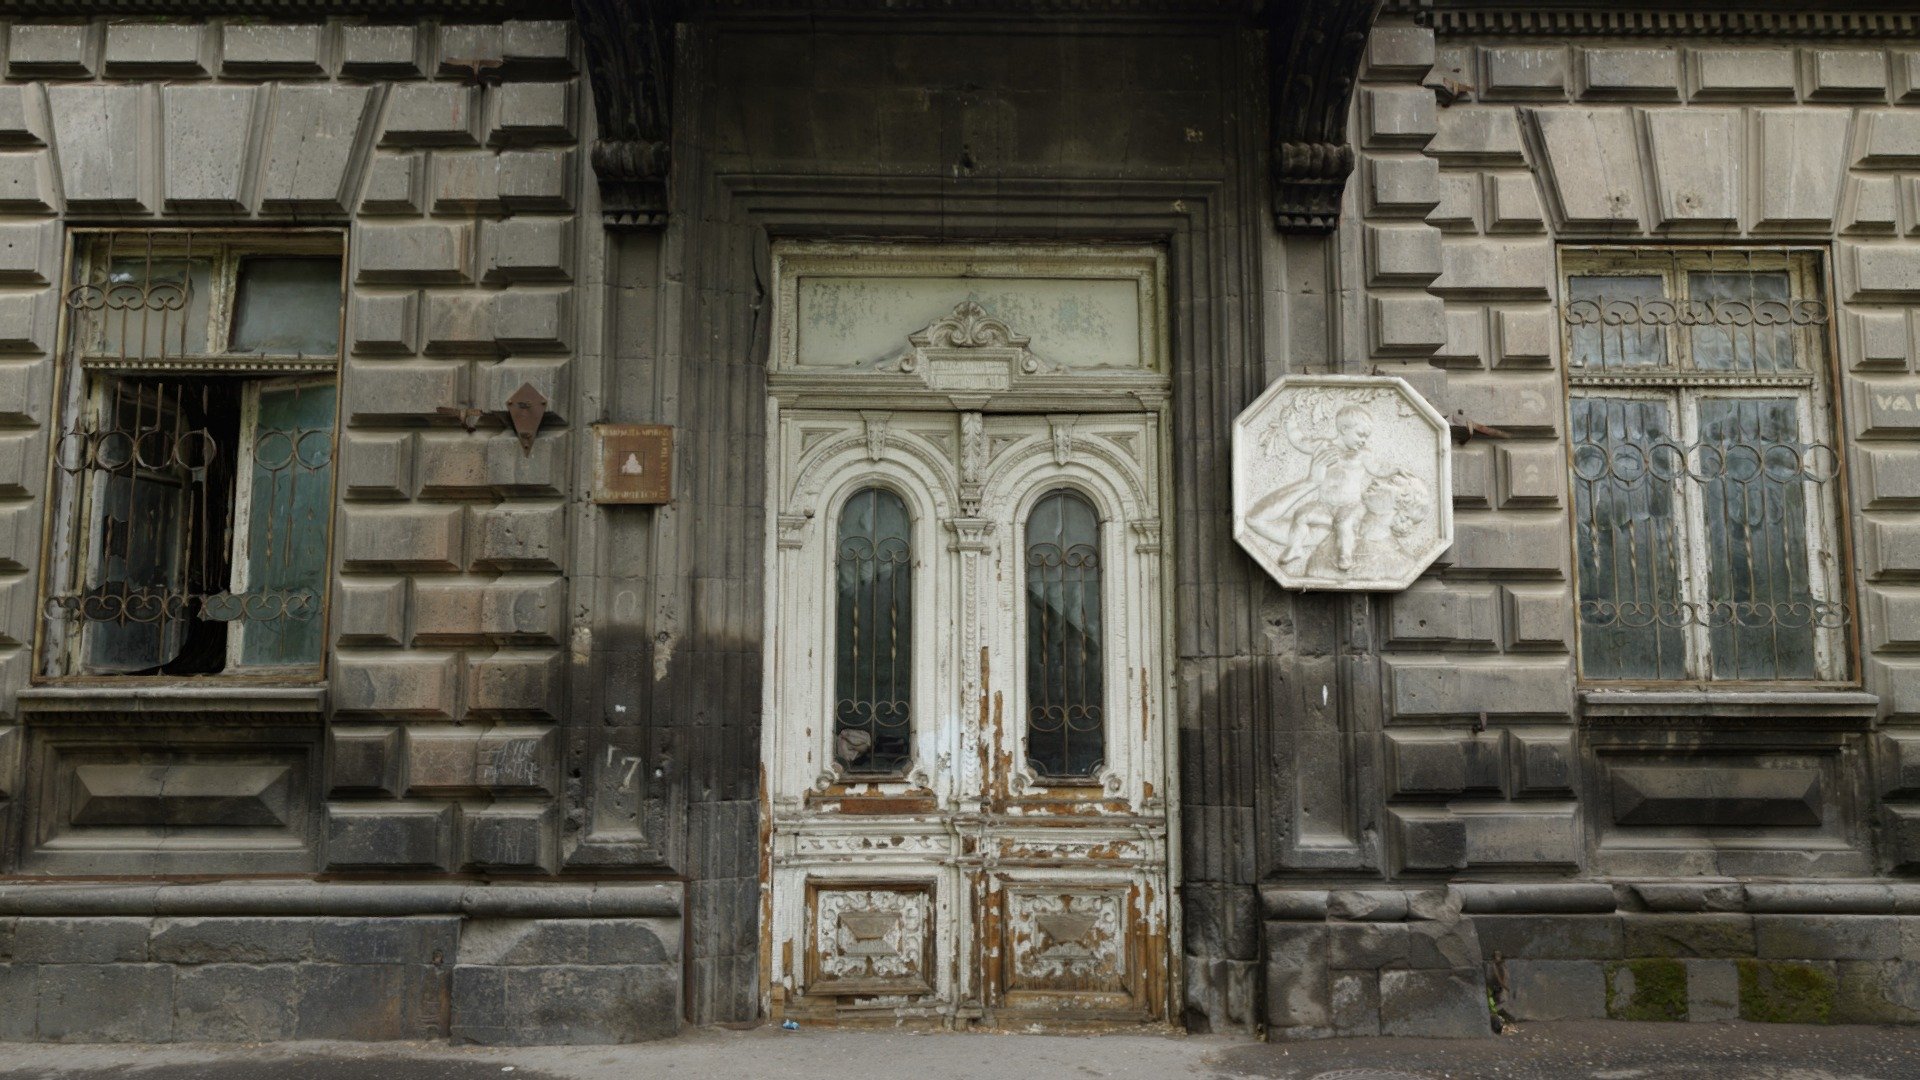 The entrance to an abandonded building on Aram Street in Yerevan, Armenia. Look through the door's window for a nice surprise!

Images captured with a Sony A7rii and reconstructed using RealityCapture. Model is scaled 1:1 3d model